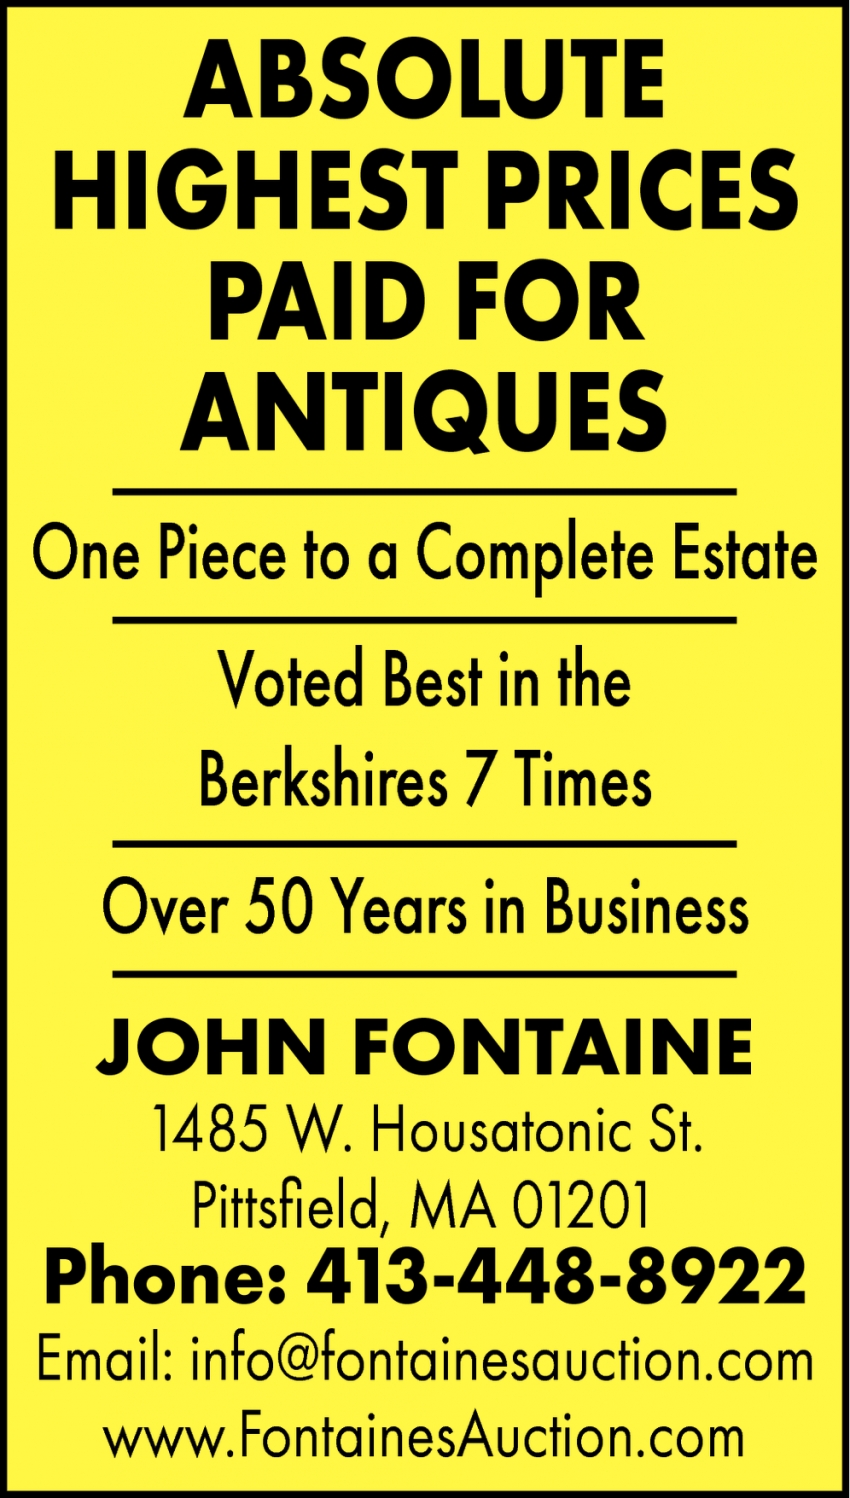 Absolute Highest Prices Paid for Antiques